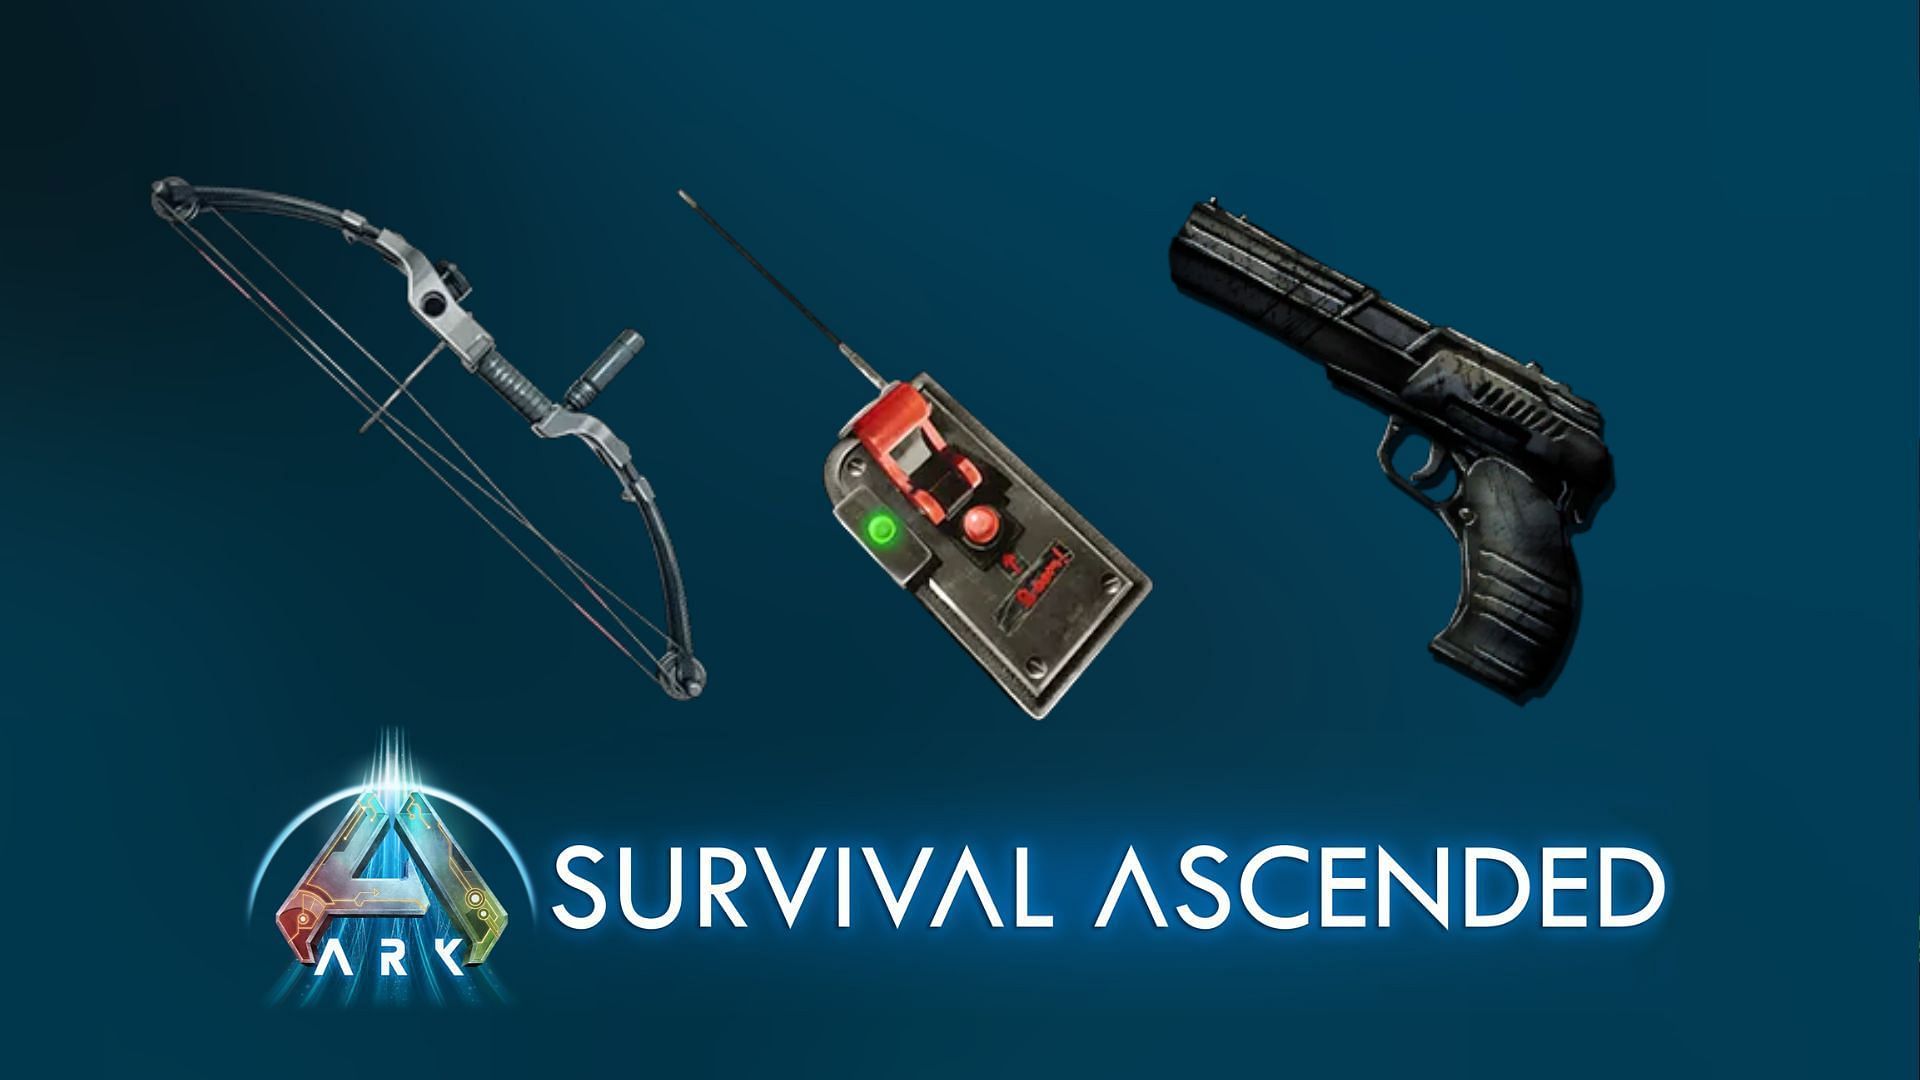 All advanced weapons in Ark Survival Ascended and how to get them ( Image via Studio Wildcard)